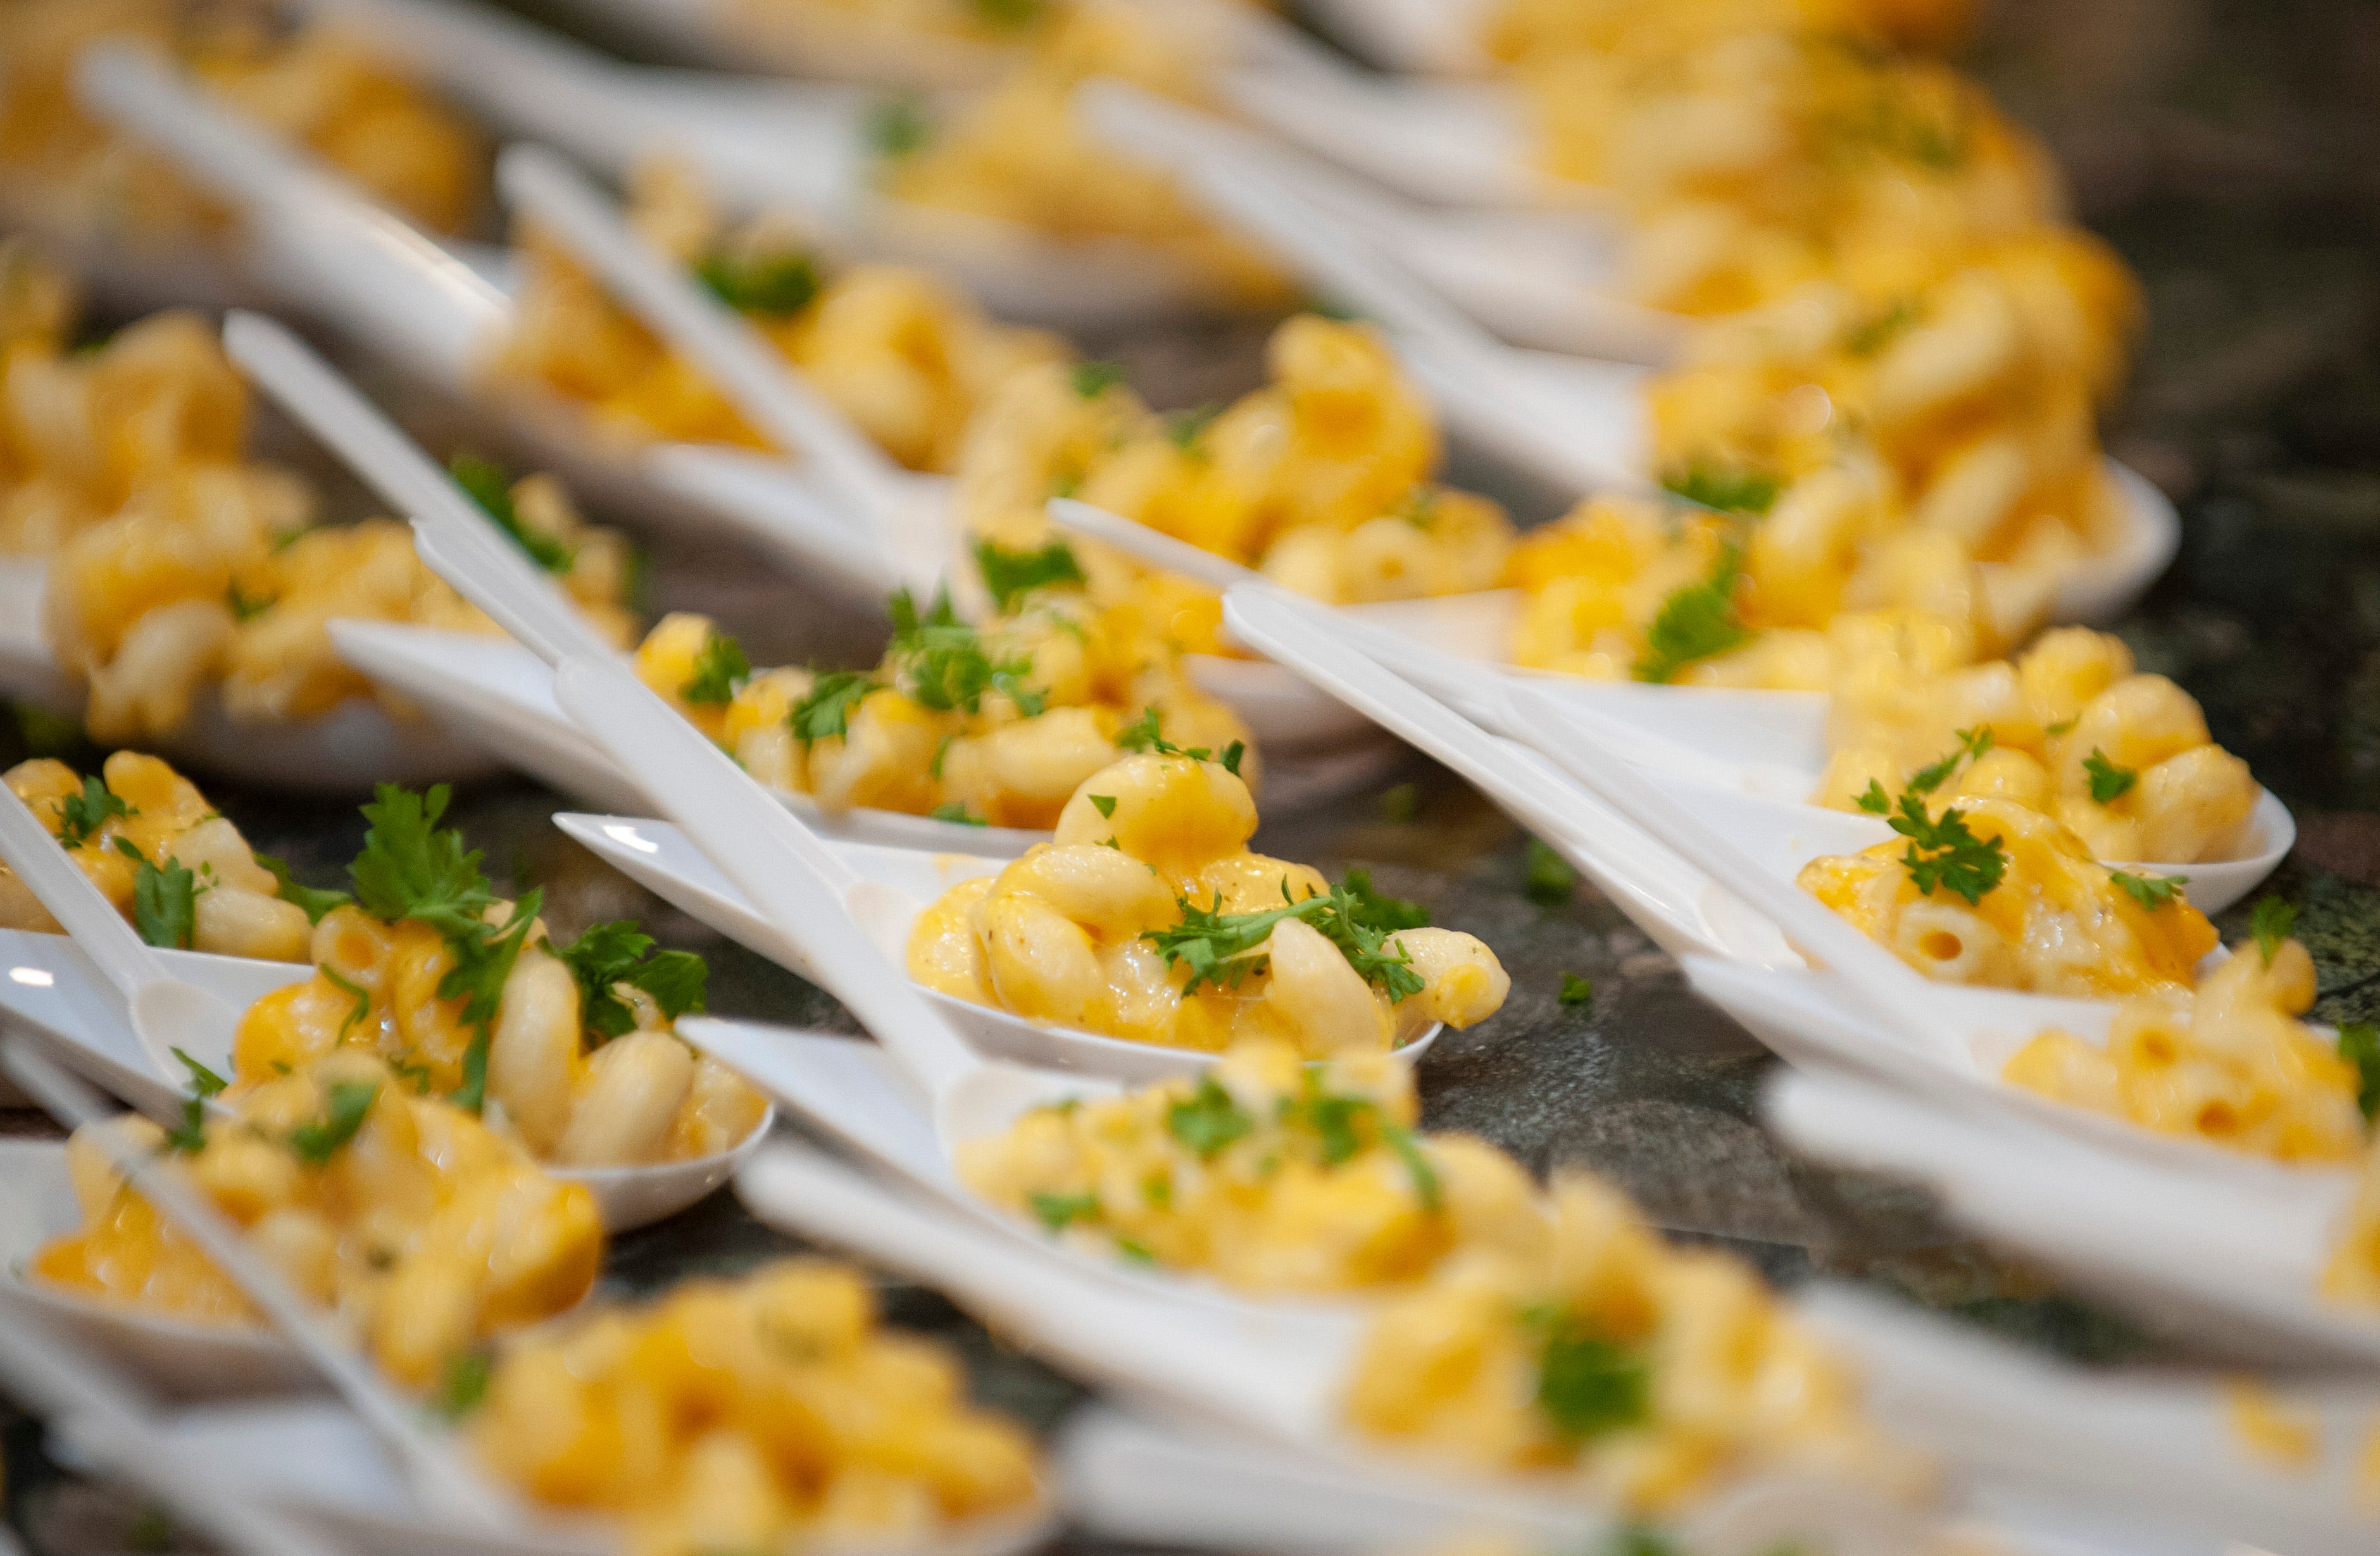 Cannabis-infused macaroni and cheese by cannabis edibles chef Gigi Diaz are displayed as free samples for guests to enjoy.